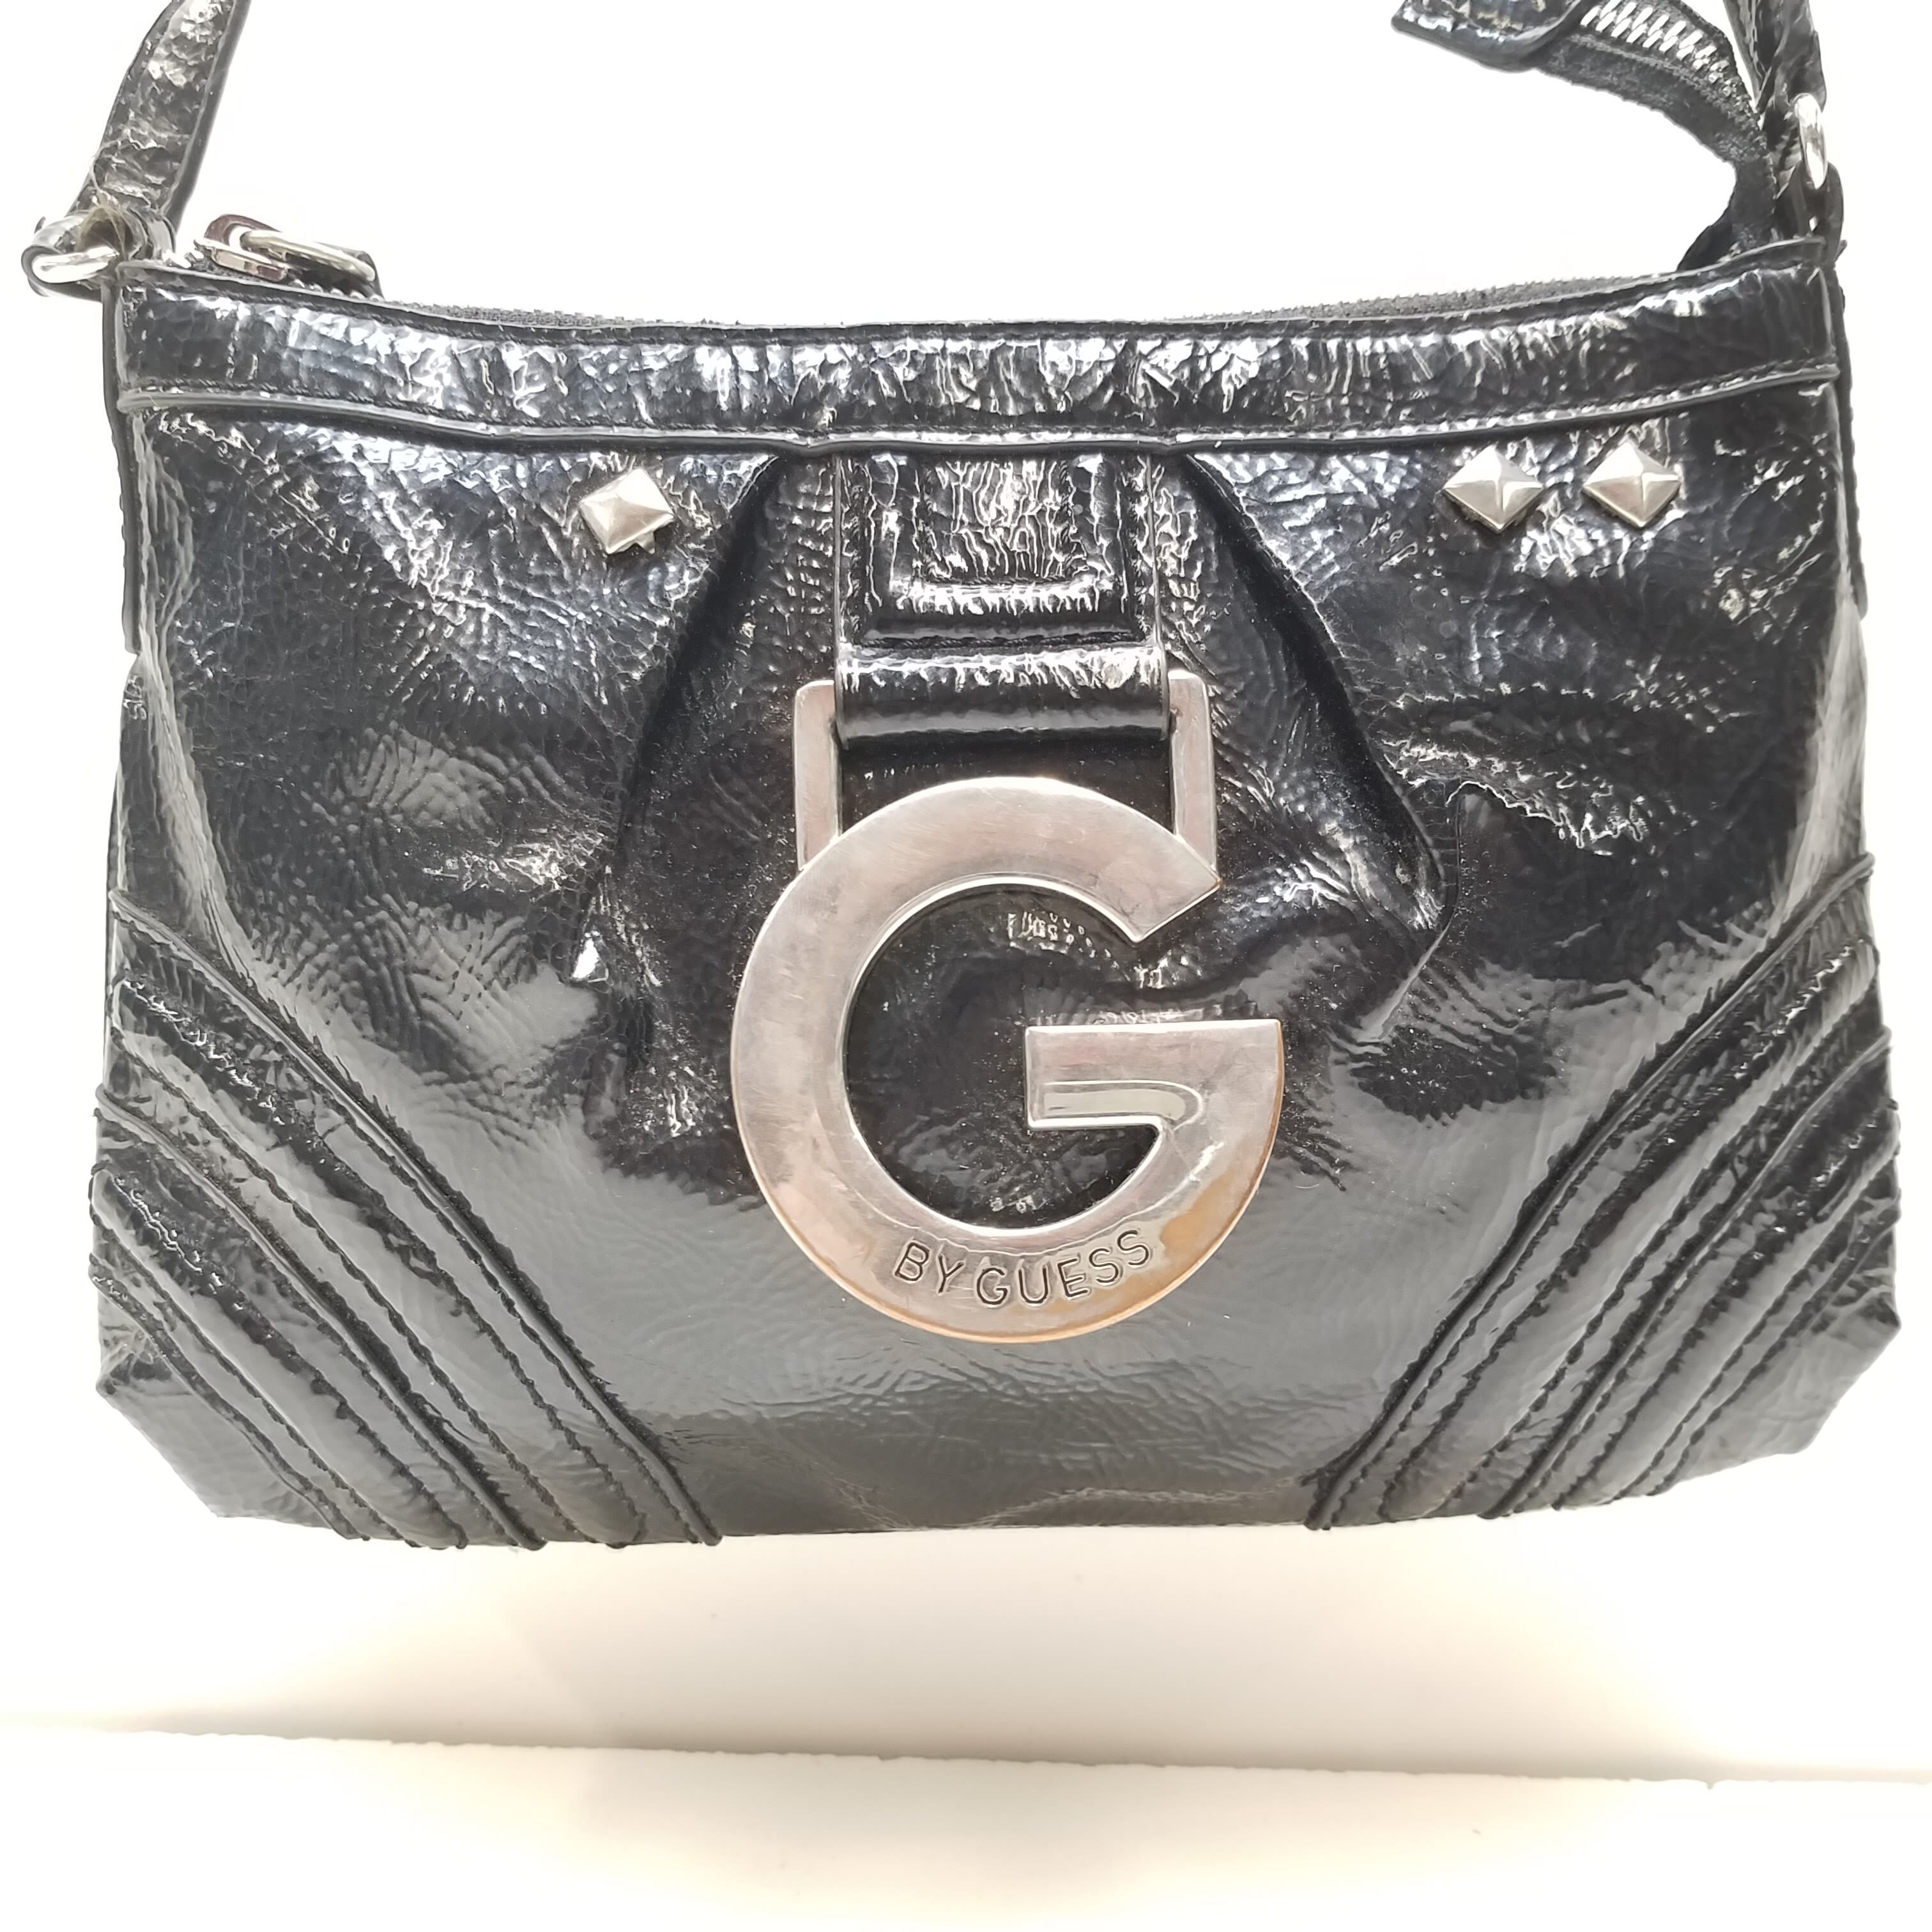 Patent leather handbag GUESS Black in Patent leather - 38544116